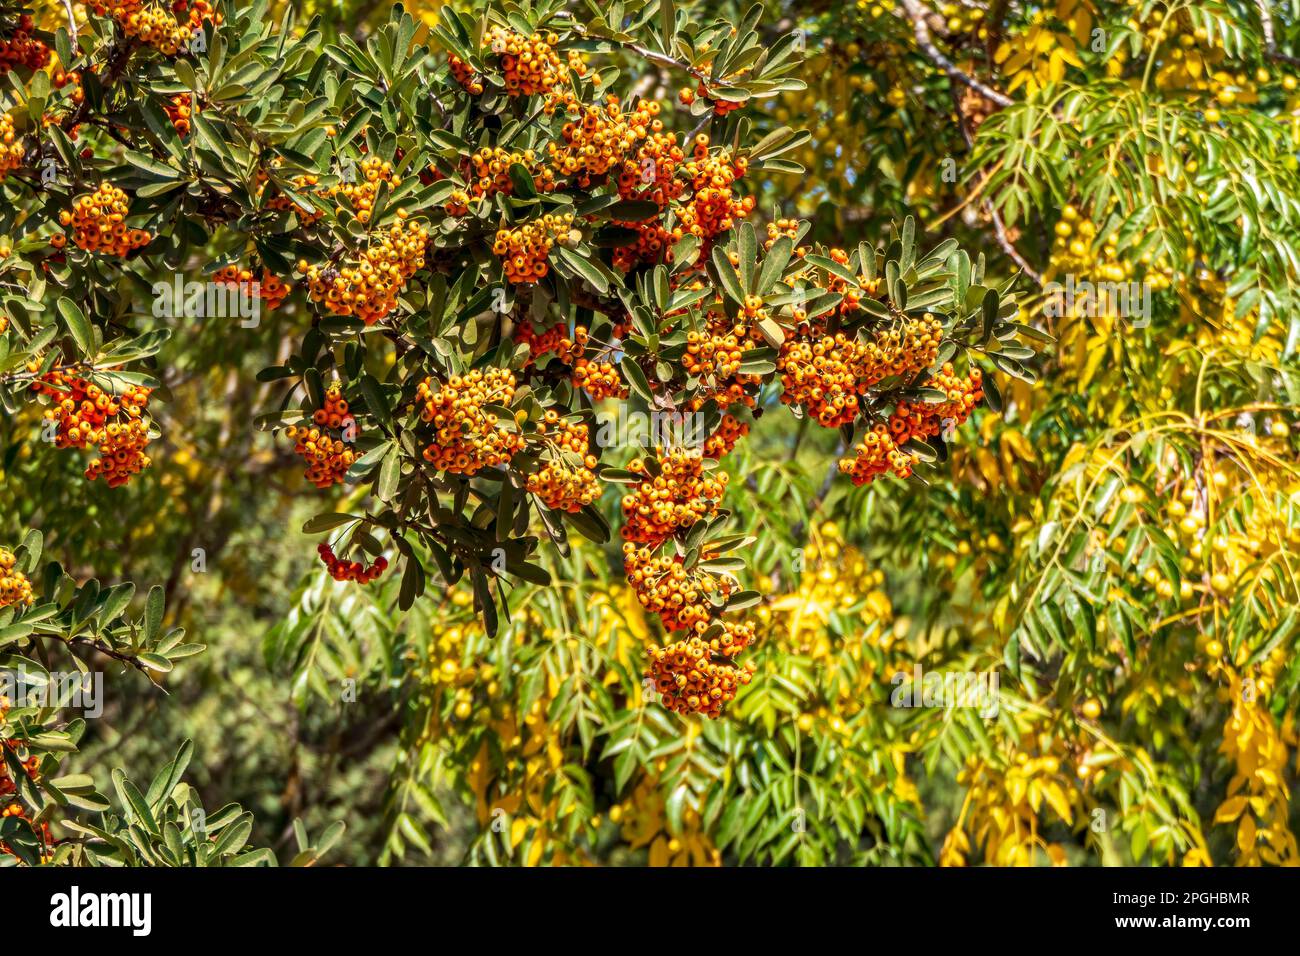 Ripe orange berries of Pyracantha Firethorns on the blurred background close up Stock Photo